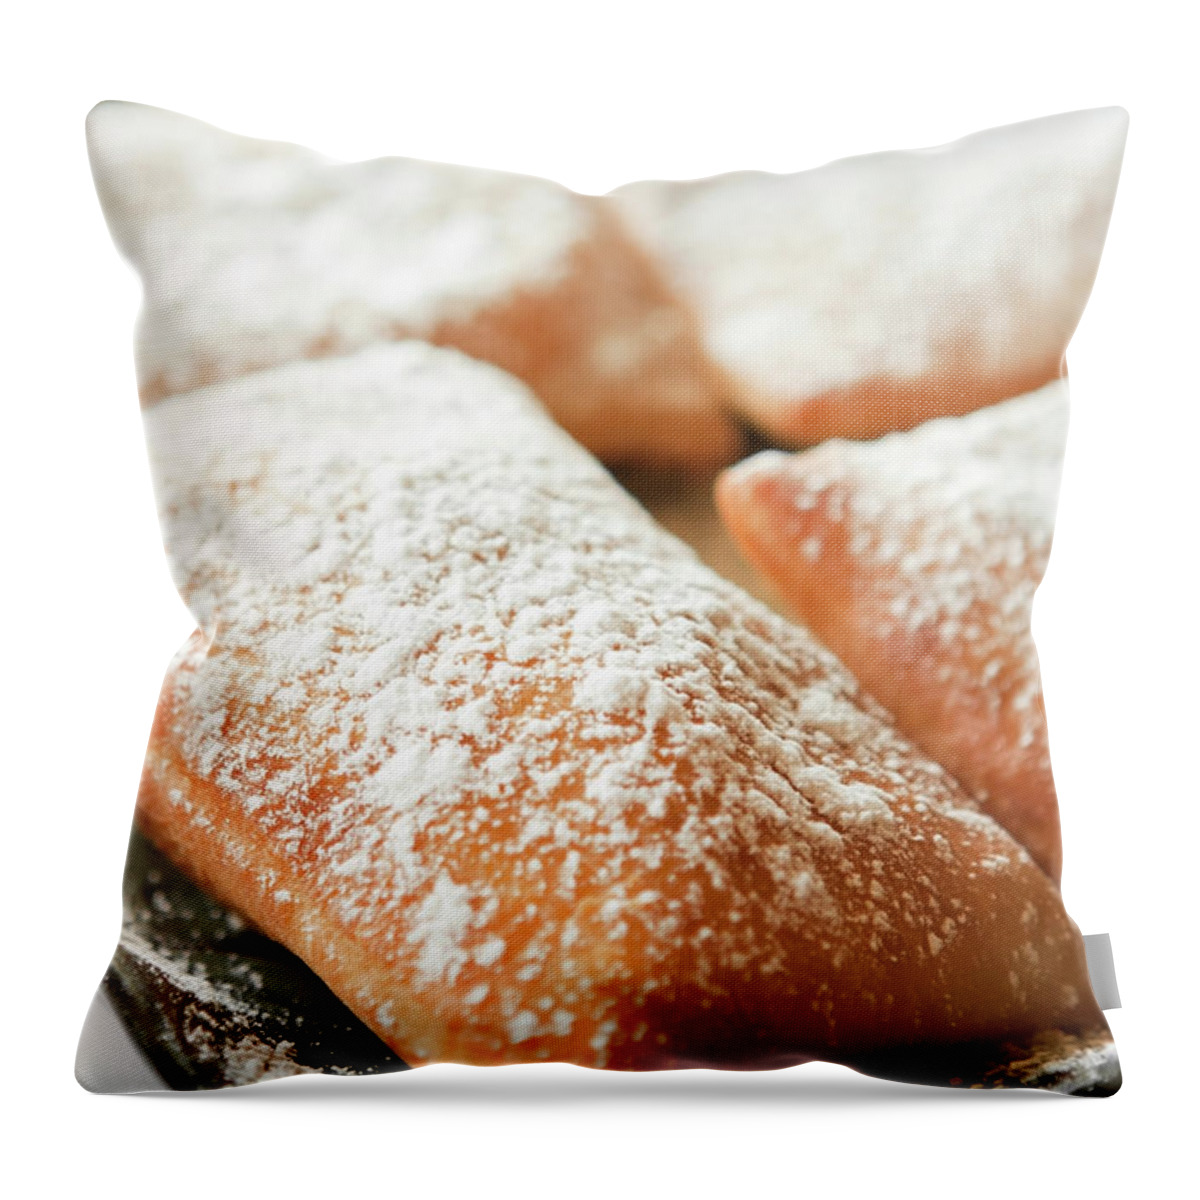 Bakery Throw Pillow featuring the photograph Beignet by Lazywing